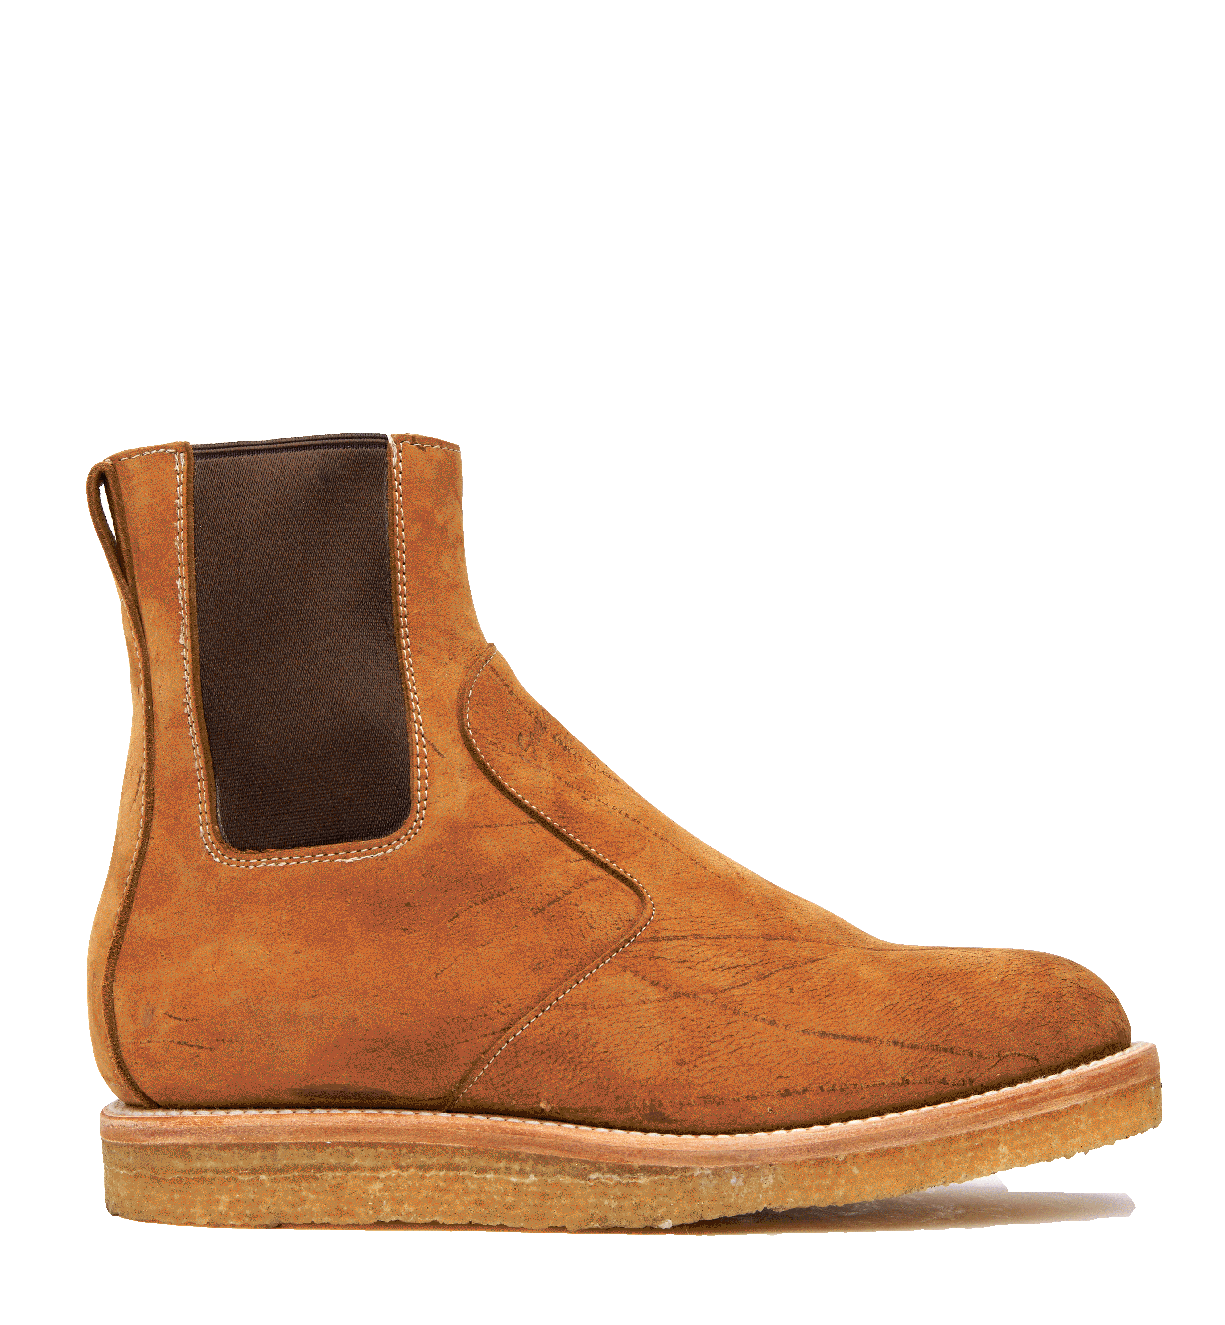 Brown suede Santa Rosa Brand Stamford Boot on a green background.